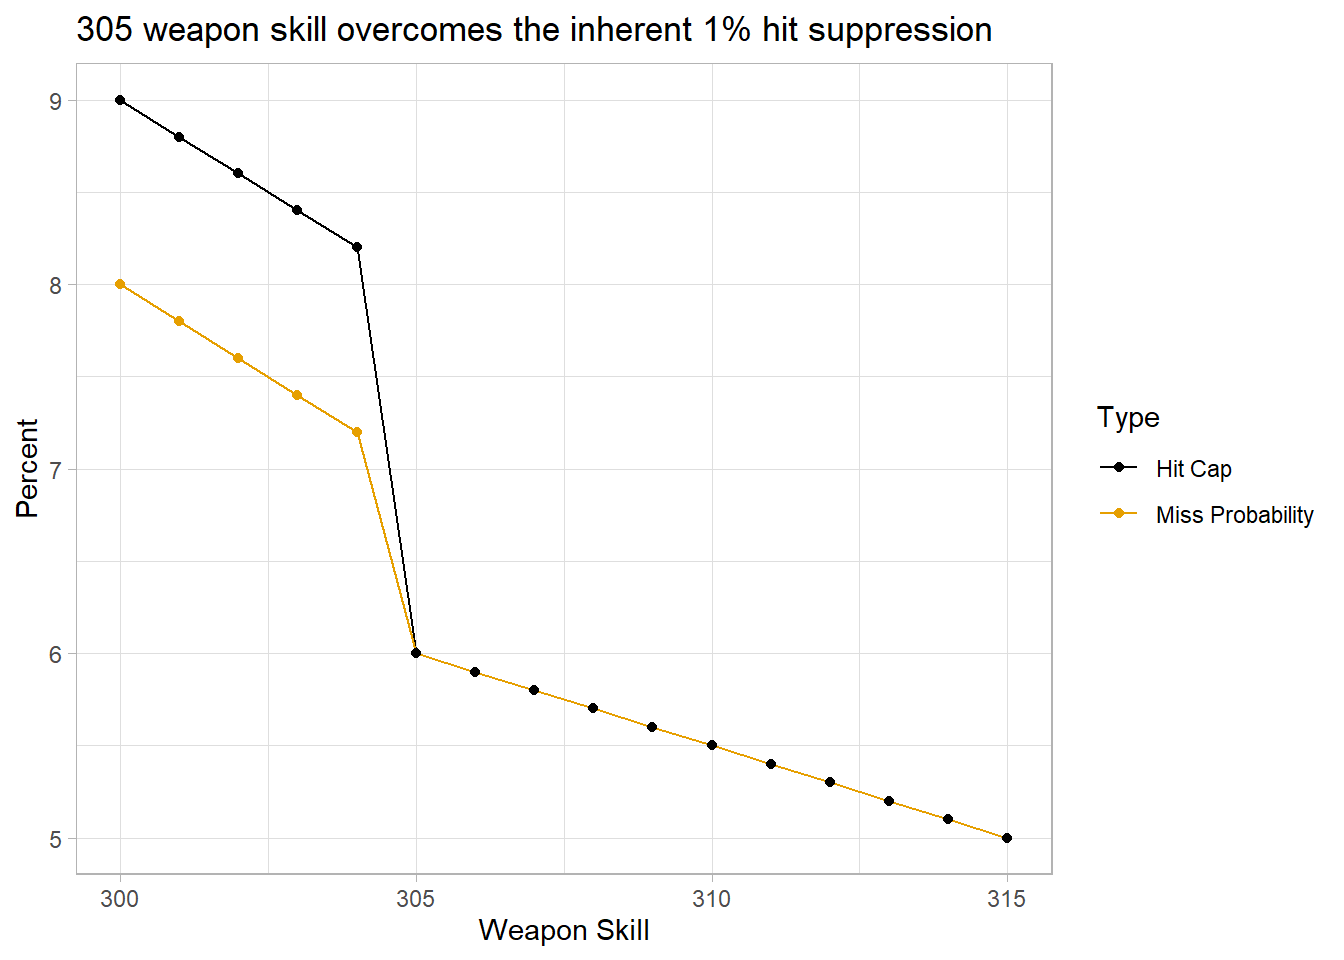 Weapon skill contributes to overcome the 1% hit suppression and the miss probability, but suffers steep diminishing returns after 305.